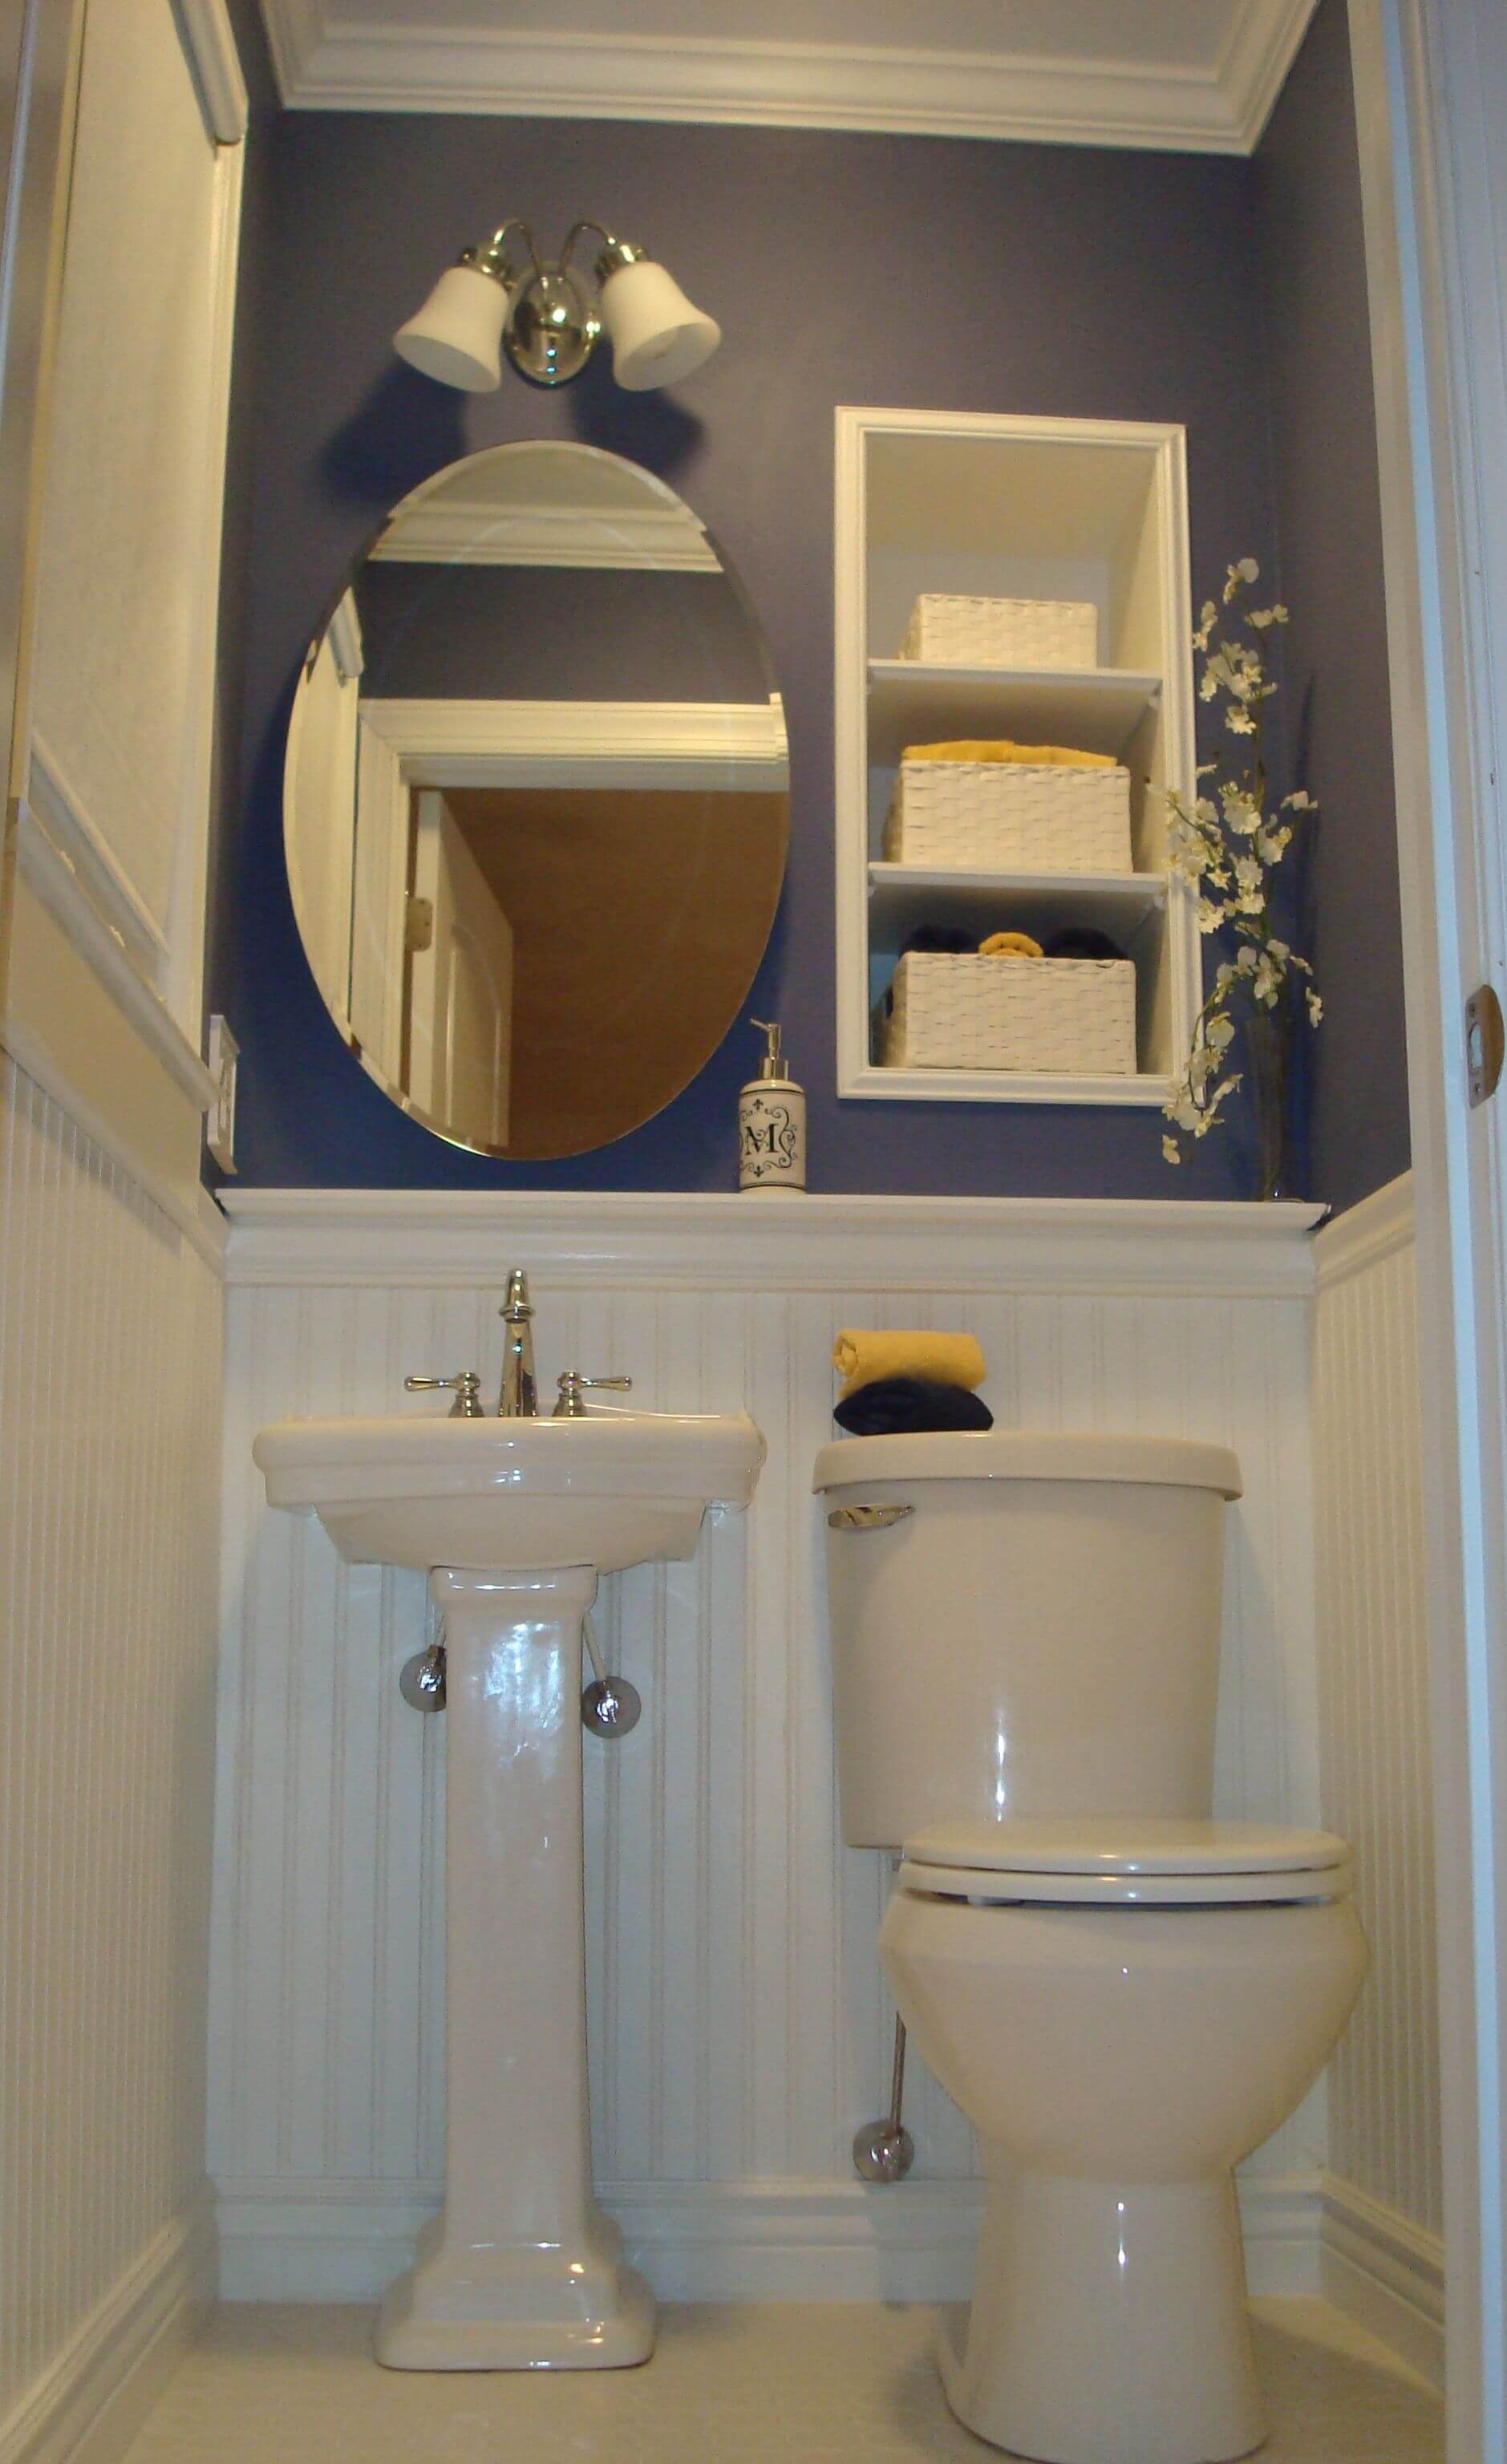 Modern Powder Room Ideas and Designs Most Favourite In 2020 - The